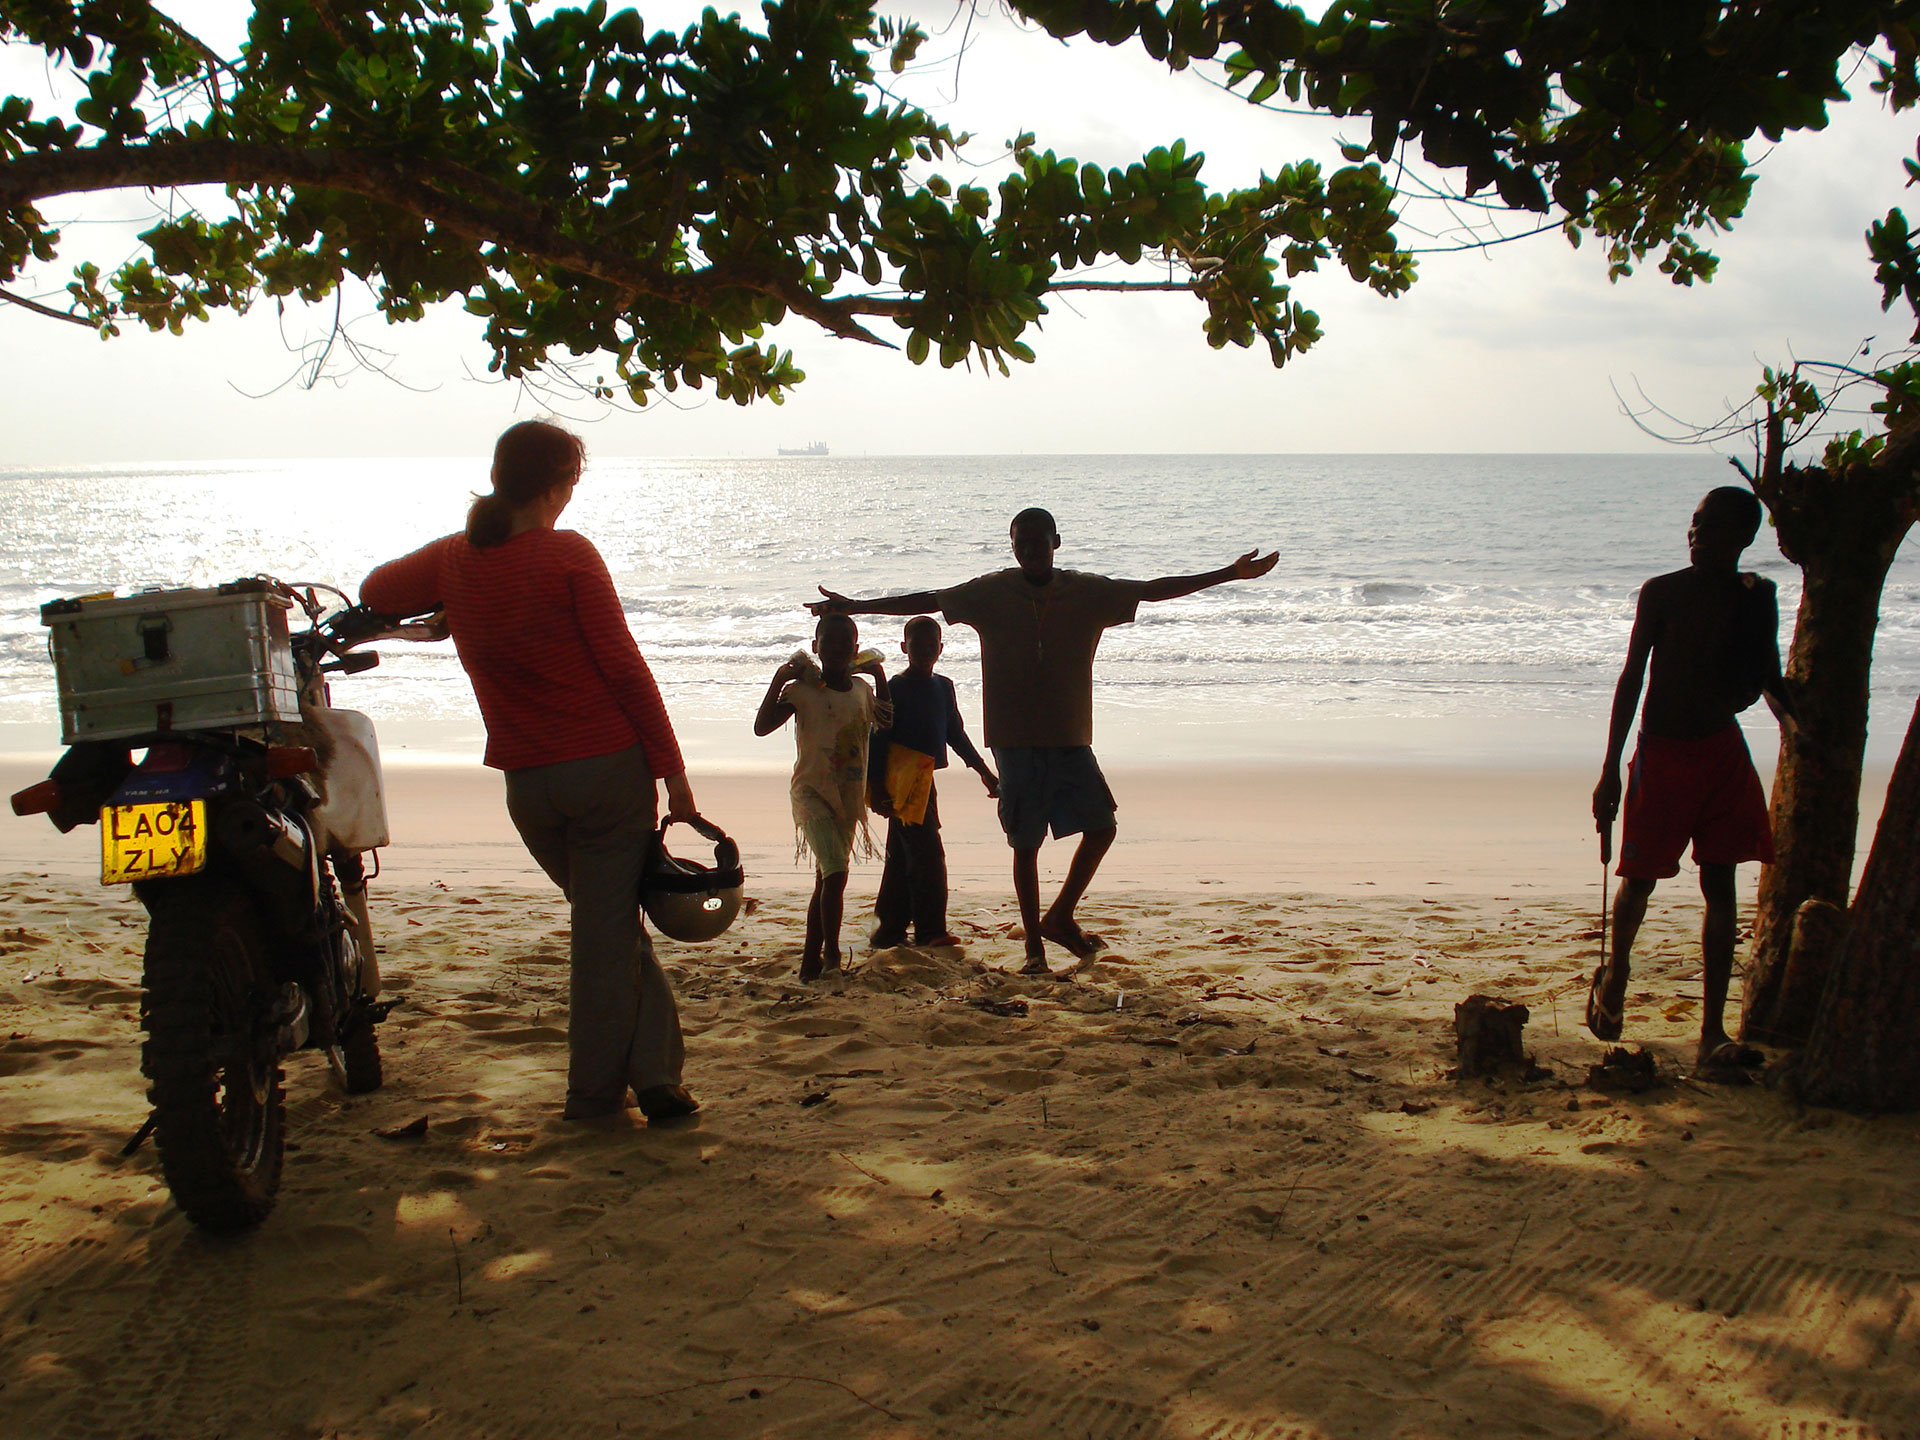 Lois Pryce with her motorbike on the beach in Cameroon talking to a group of people